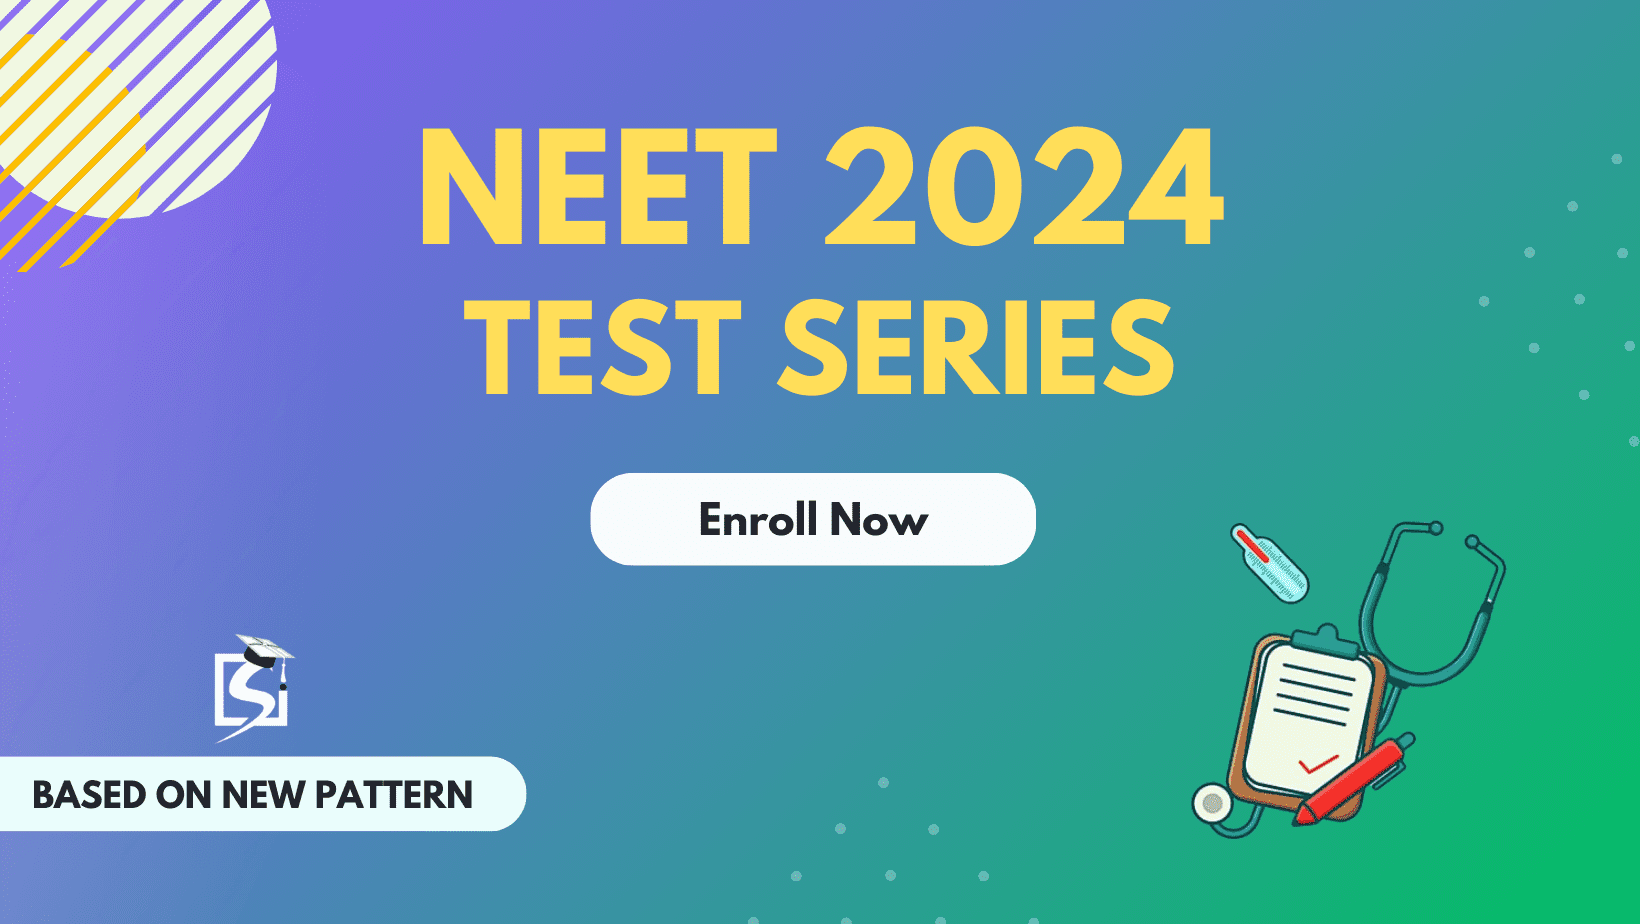 NEET Online Mock Test for 2024 - Free Test Series - Bangalore Tutoring, Lessons